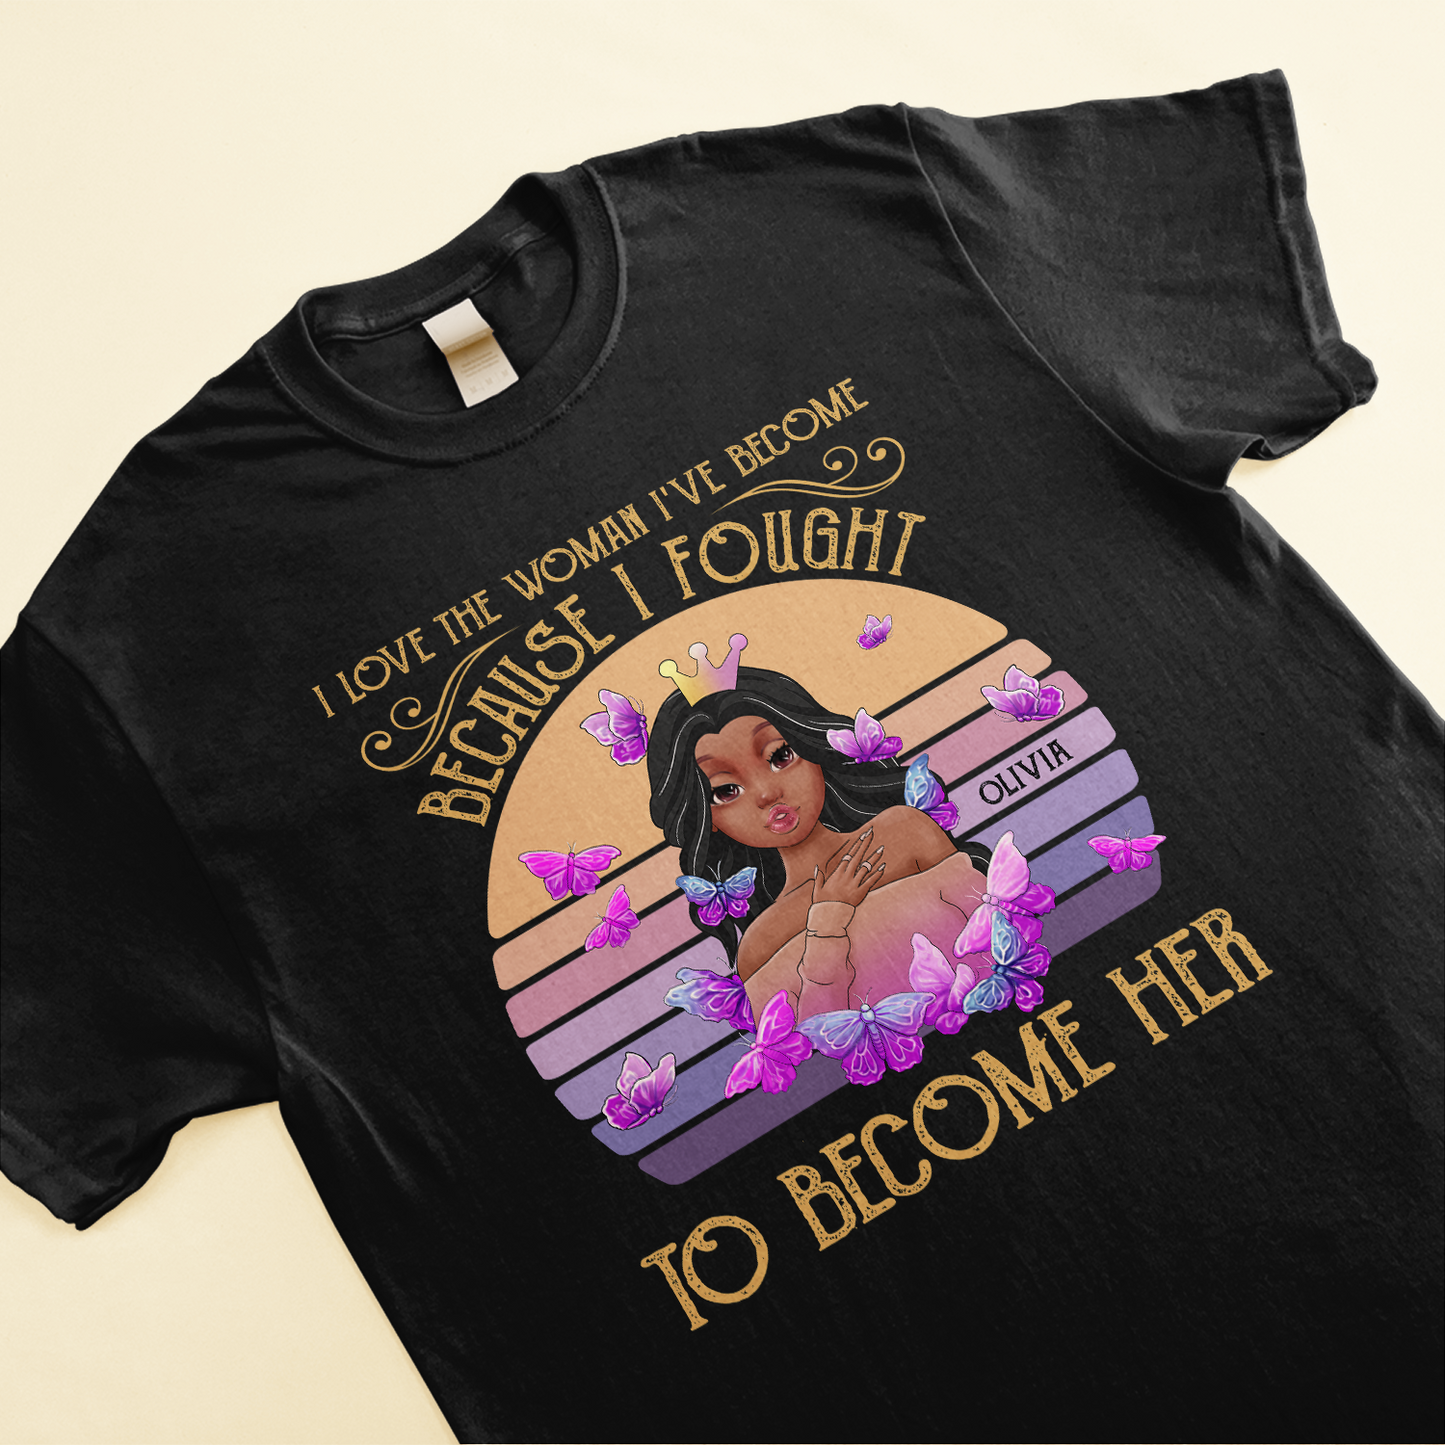 Love The Woman I've Become - Personalized Shirt - Birthday & Christmas Gift For Black Girls